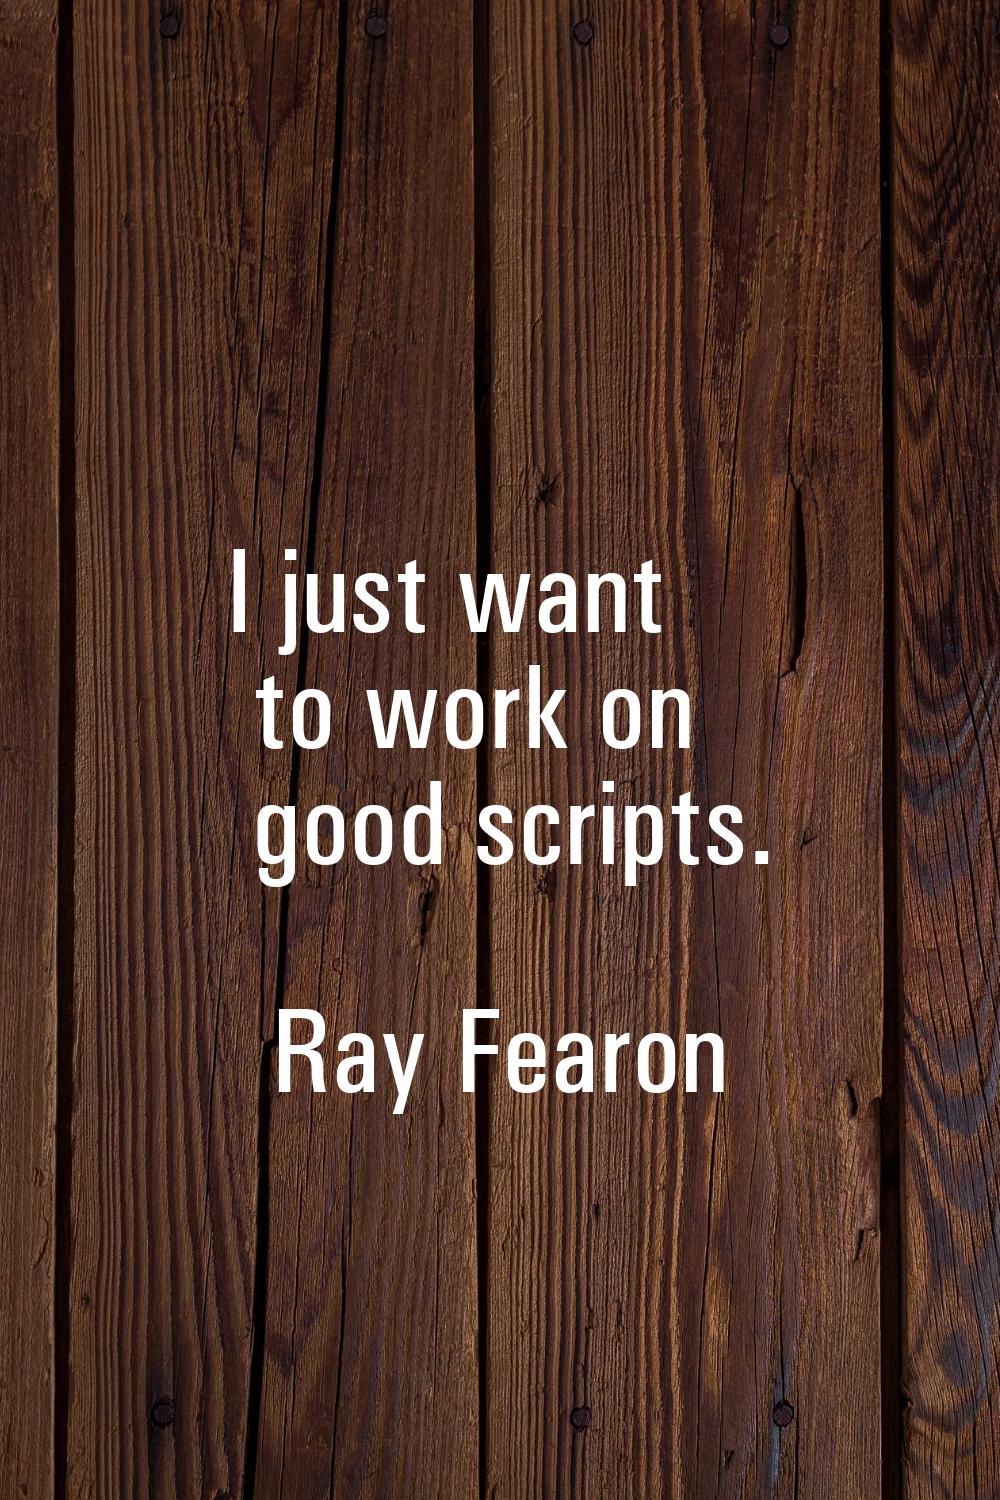 I just want to work on good scripts.